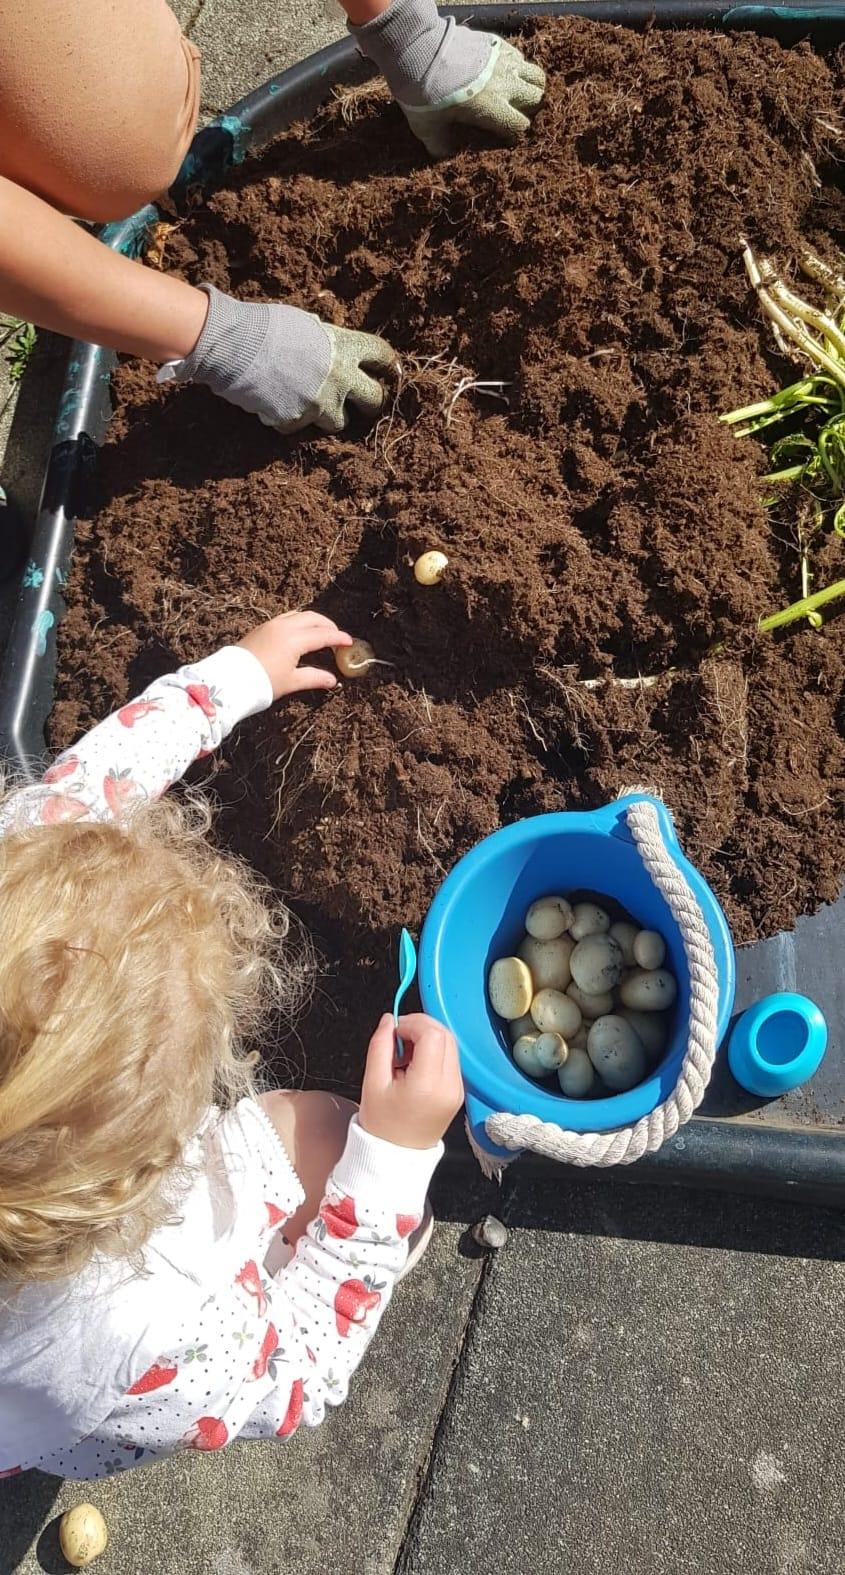 Children learning to grow their own food